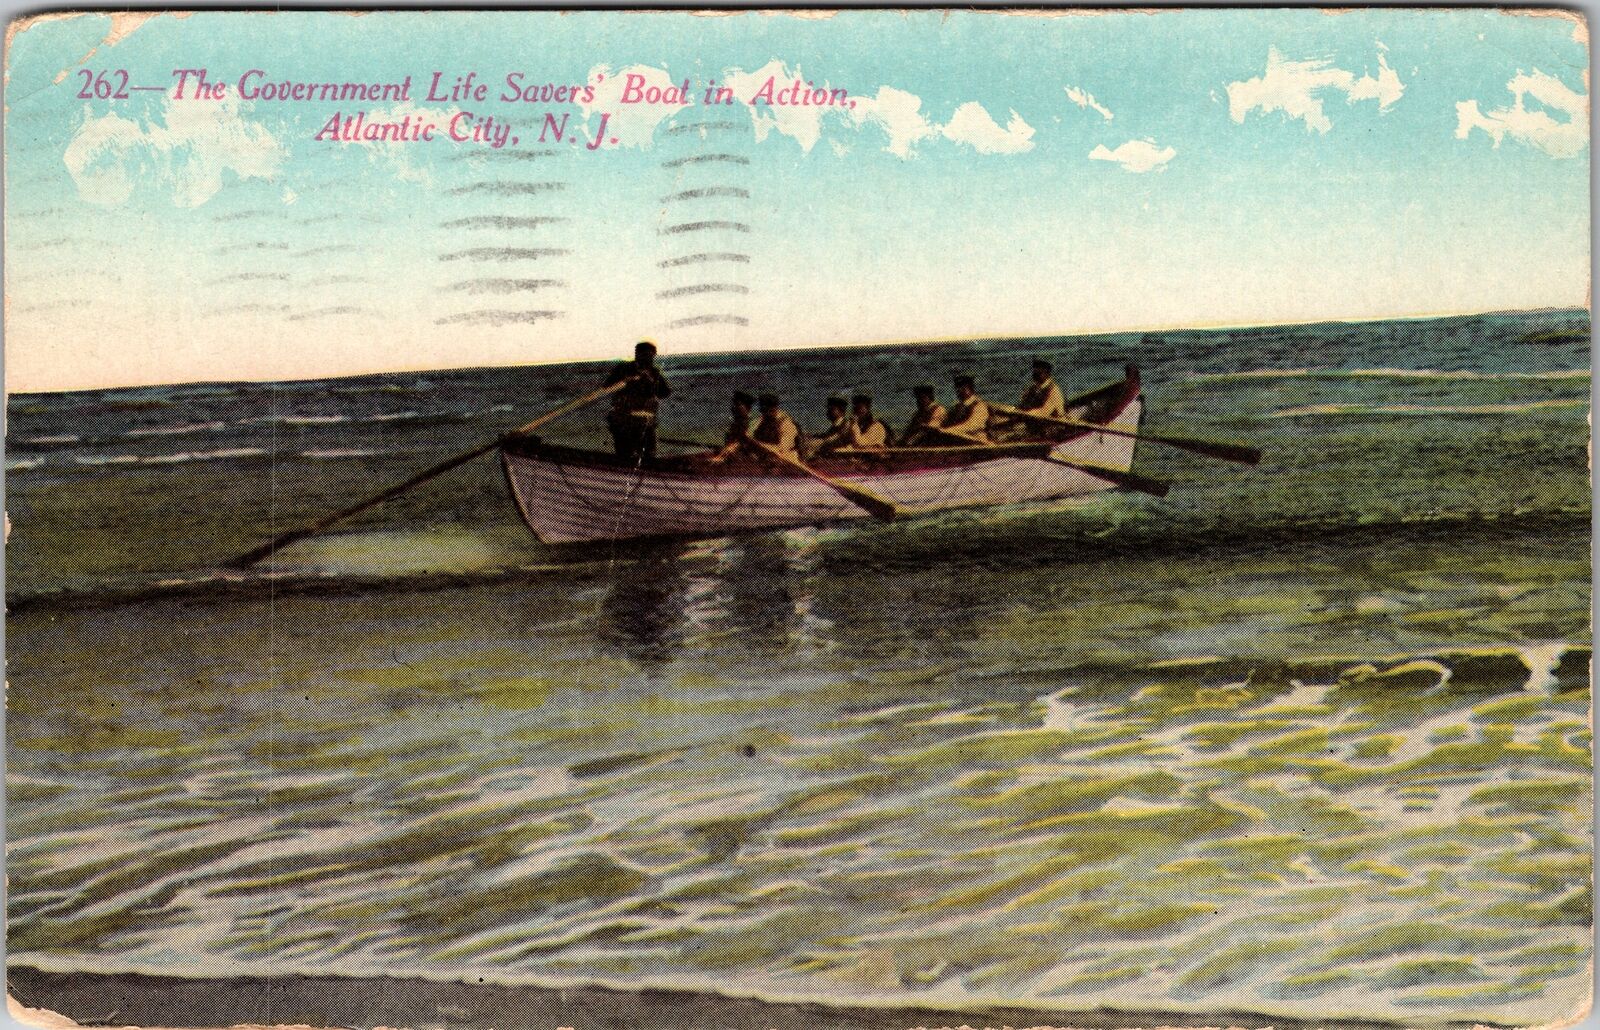 Atlantic City NJ-New Jersey Government Life Savers' Boat in Action Old Postcard